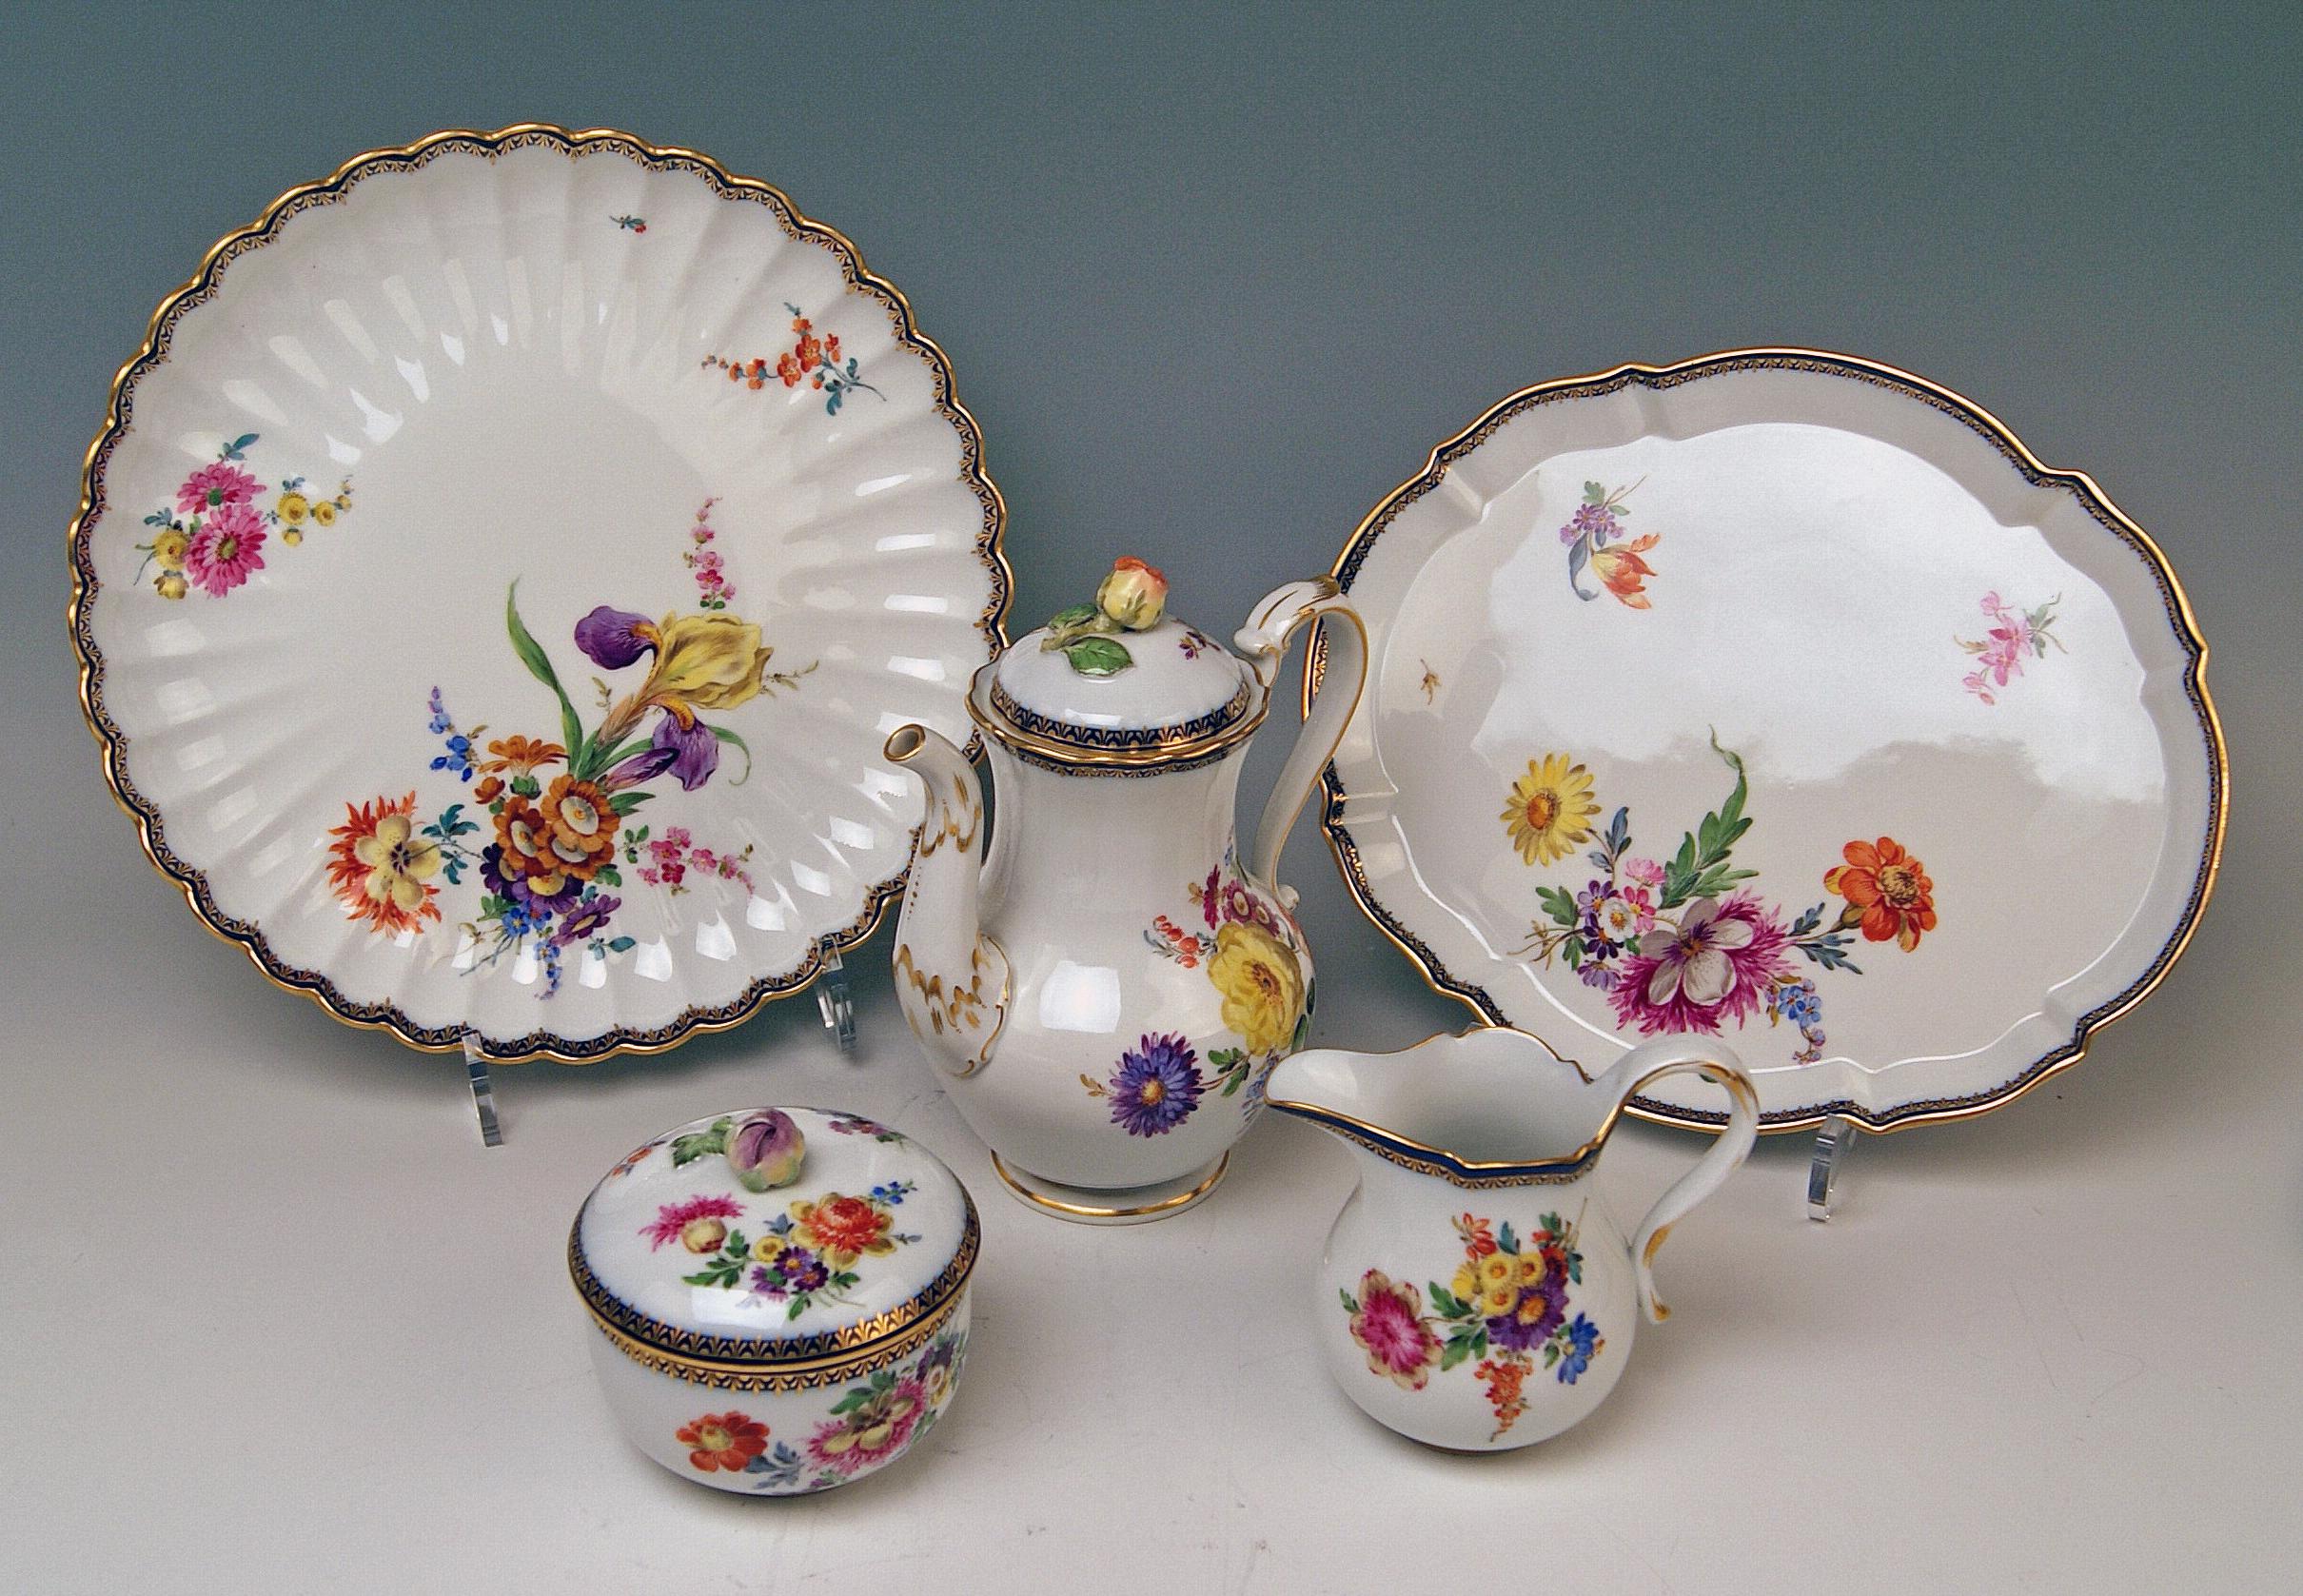 We invite you here to look at a splendid Meissen tea set for six persons: 

This tea set is of finest appearance due to gorgeous various multicolored flower paintings:
Flower bouquets and smaller flowers laid on white porcelain = this decoration